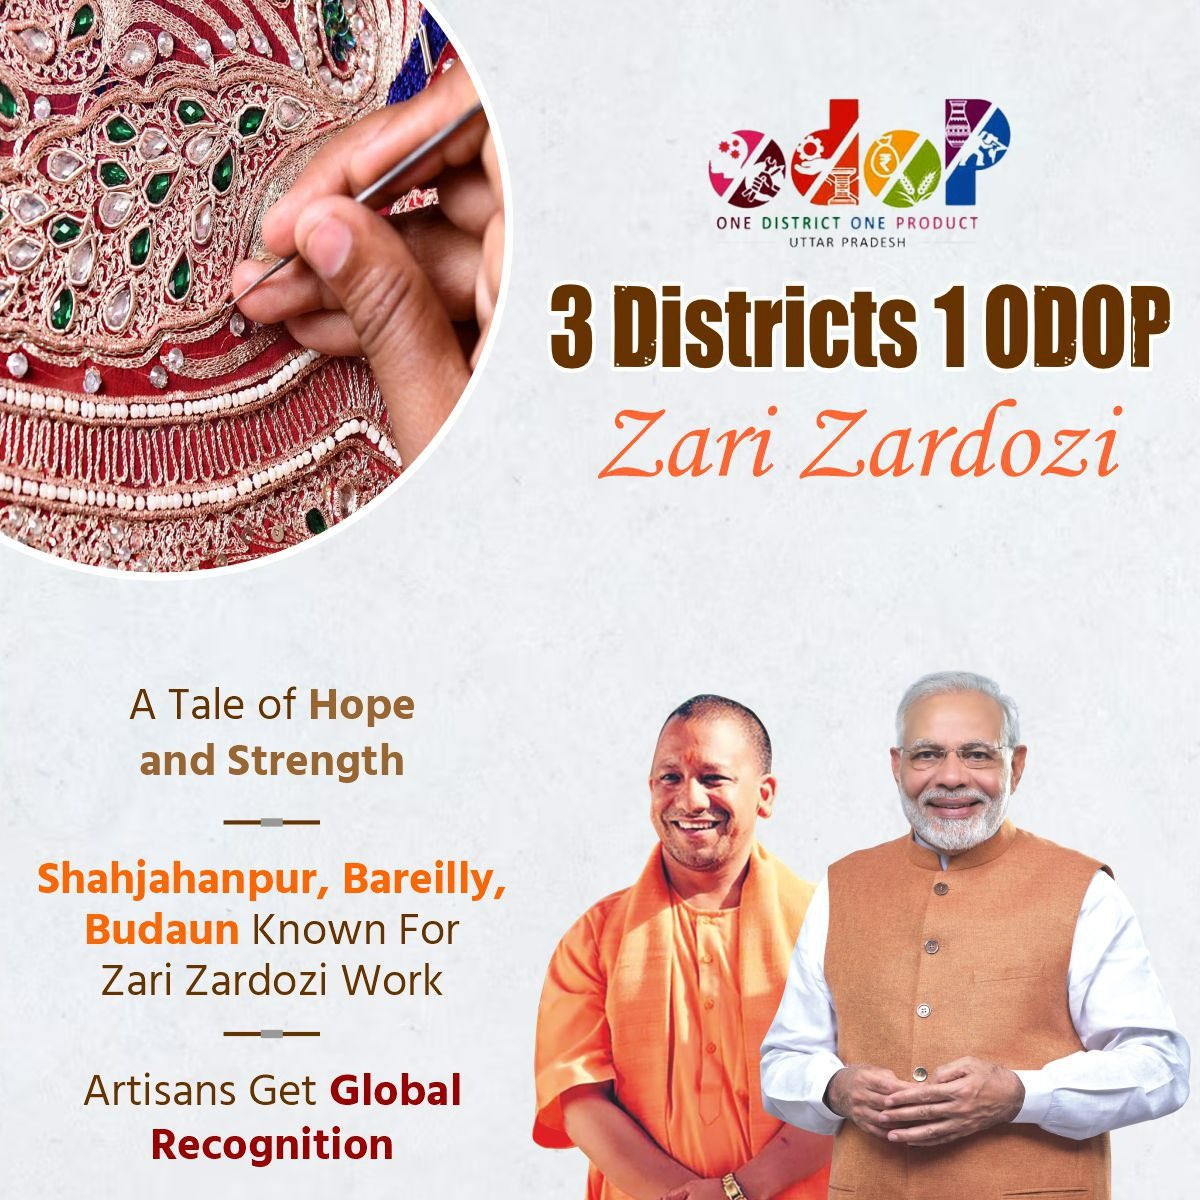 The double engine government has been taking steps to bring the work of Zari Zardozi into the spotlight in order to improve exports, which will lead to enhancements in the lives of the artisans.
#TripleEngineUP